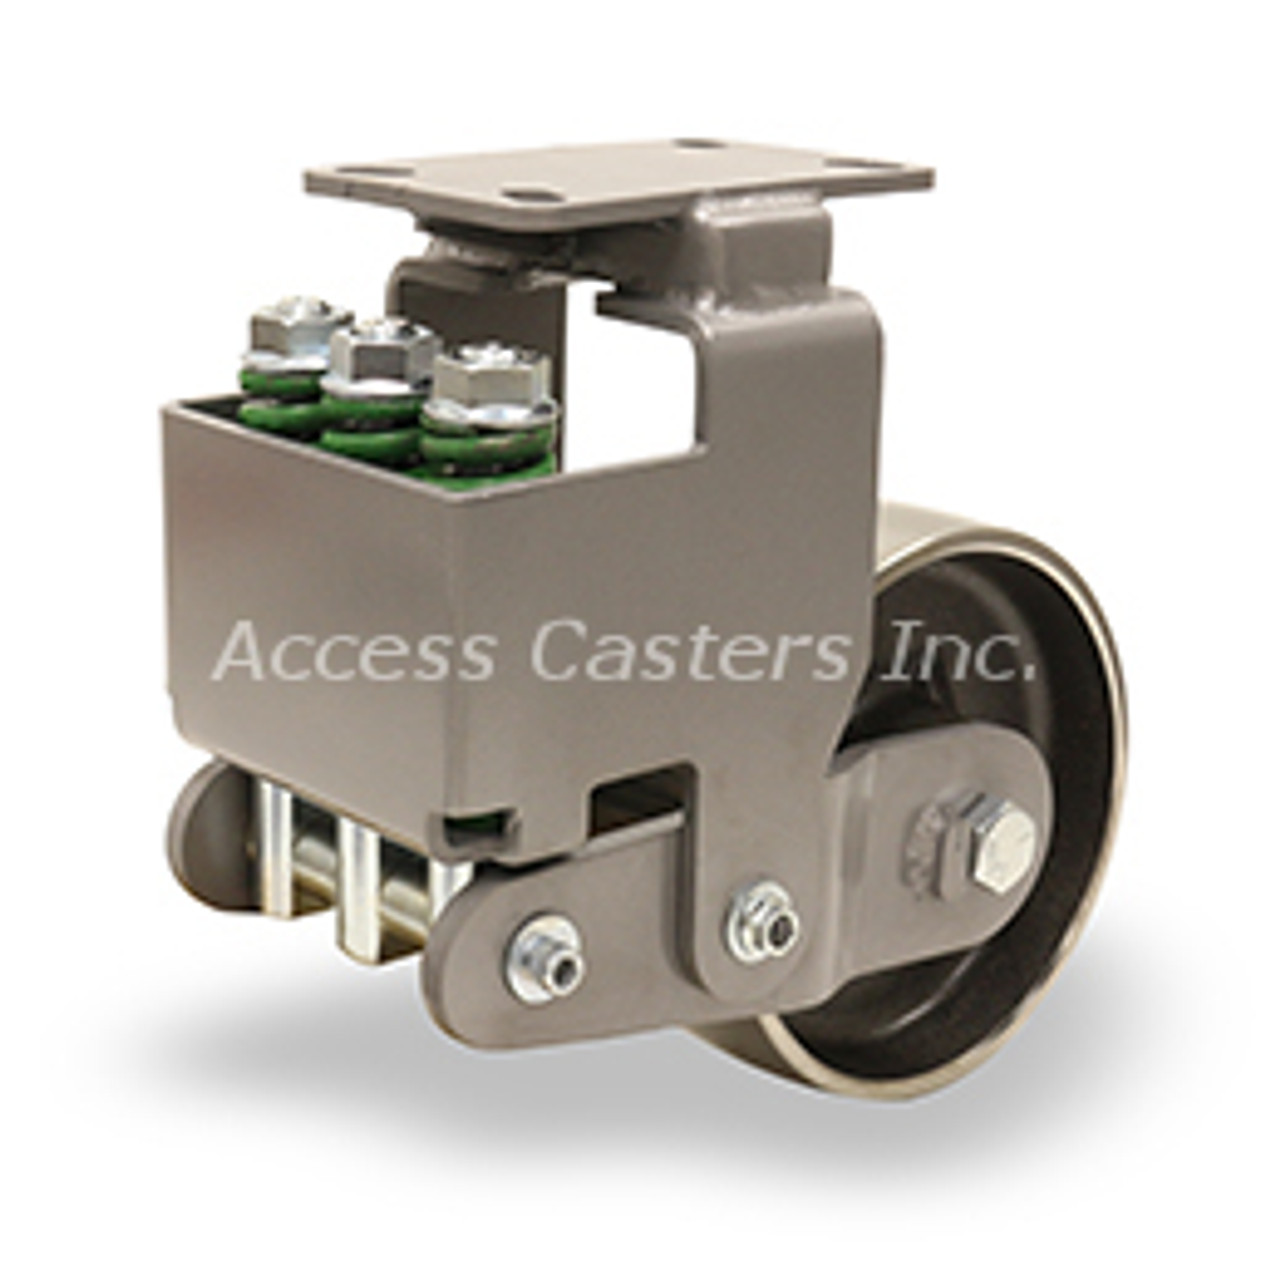 R-AEZFFM-83FSB Spring loaded caster with 8" x 3" Forged Steel wheel